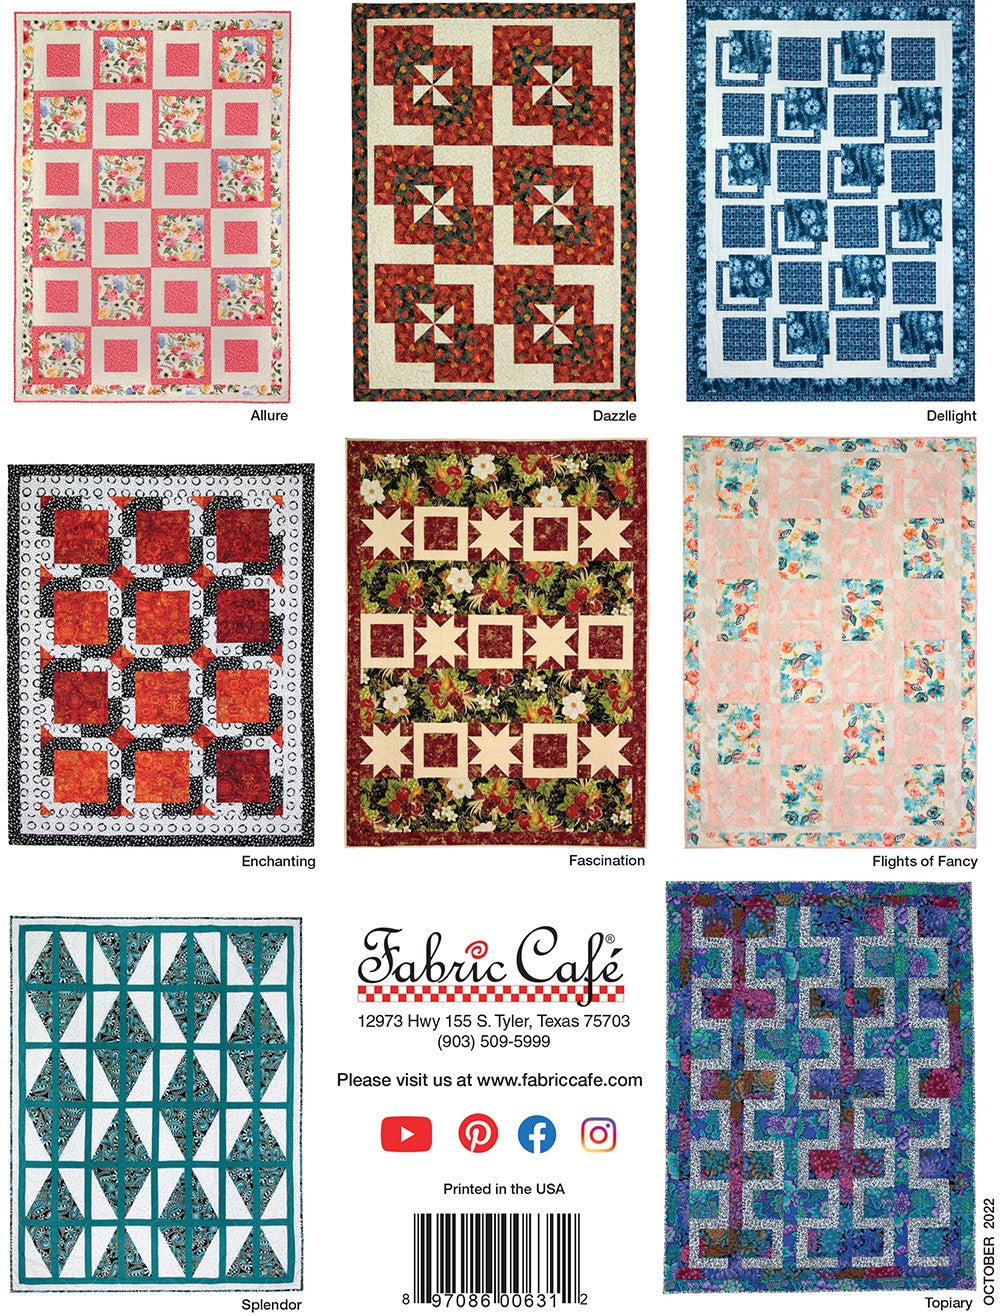 The Magic of 3-Yard Quilts Pattern Book By Fran Morgan and Donna Robertson for Fabric Cafe